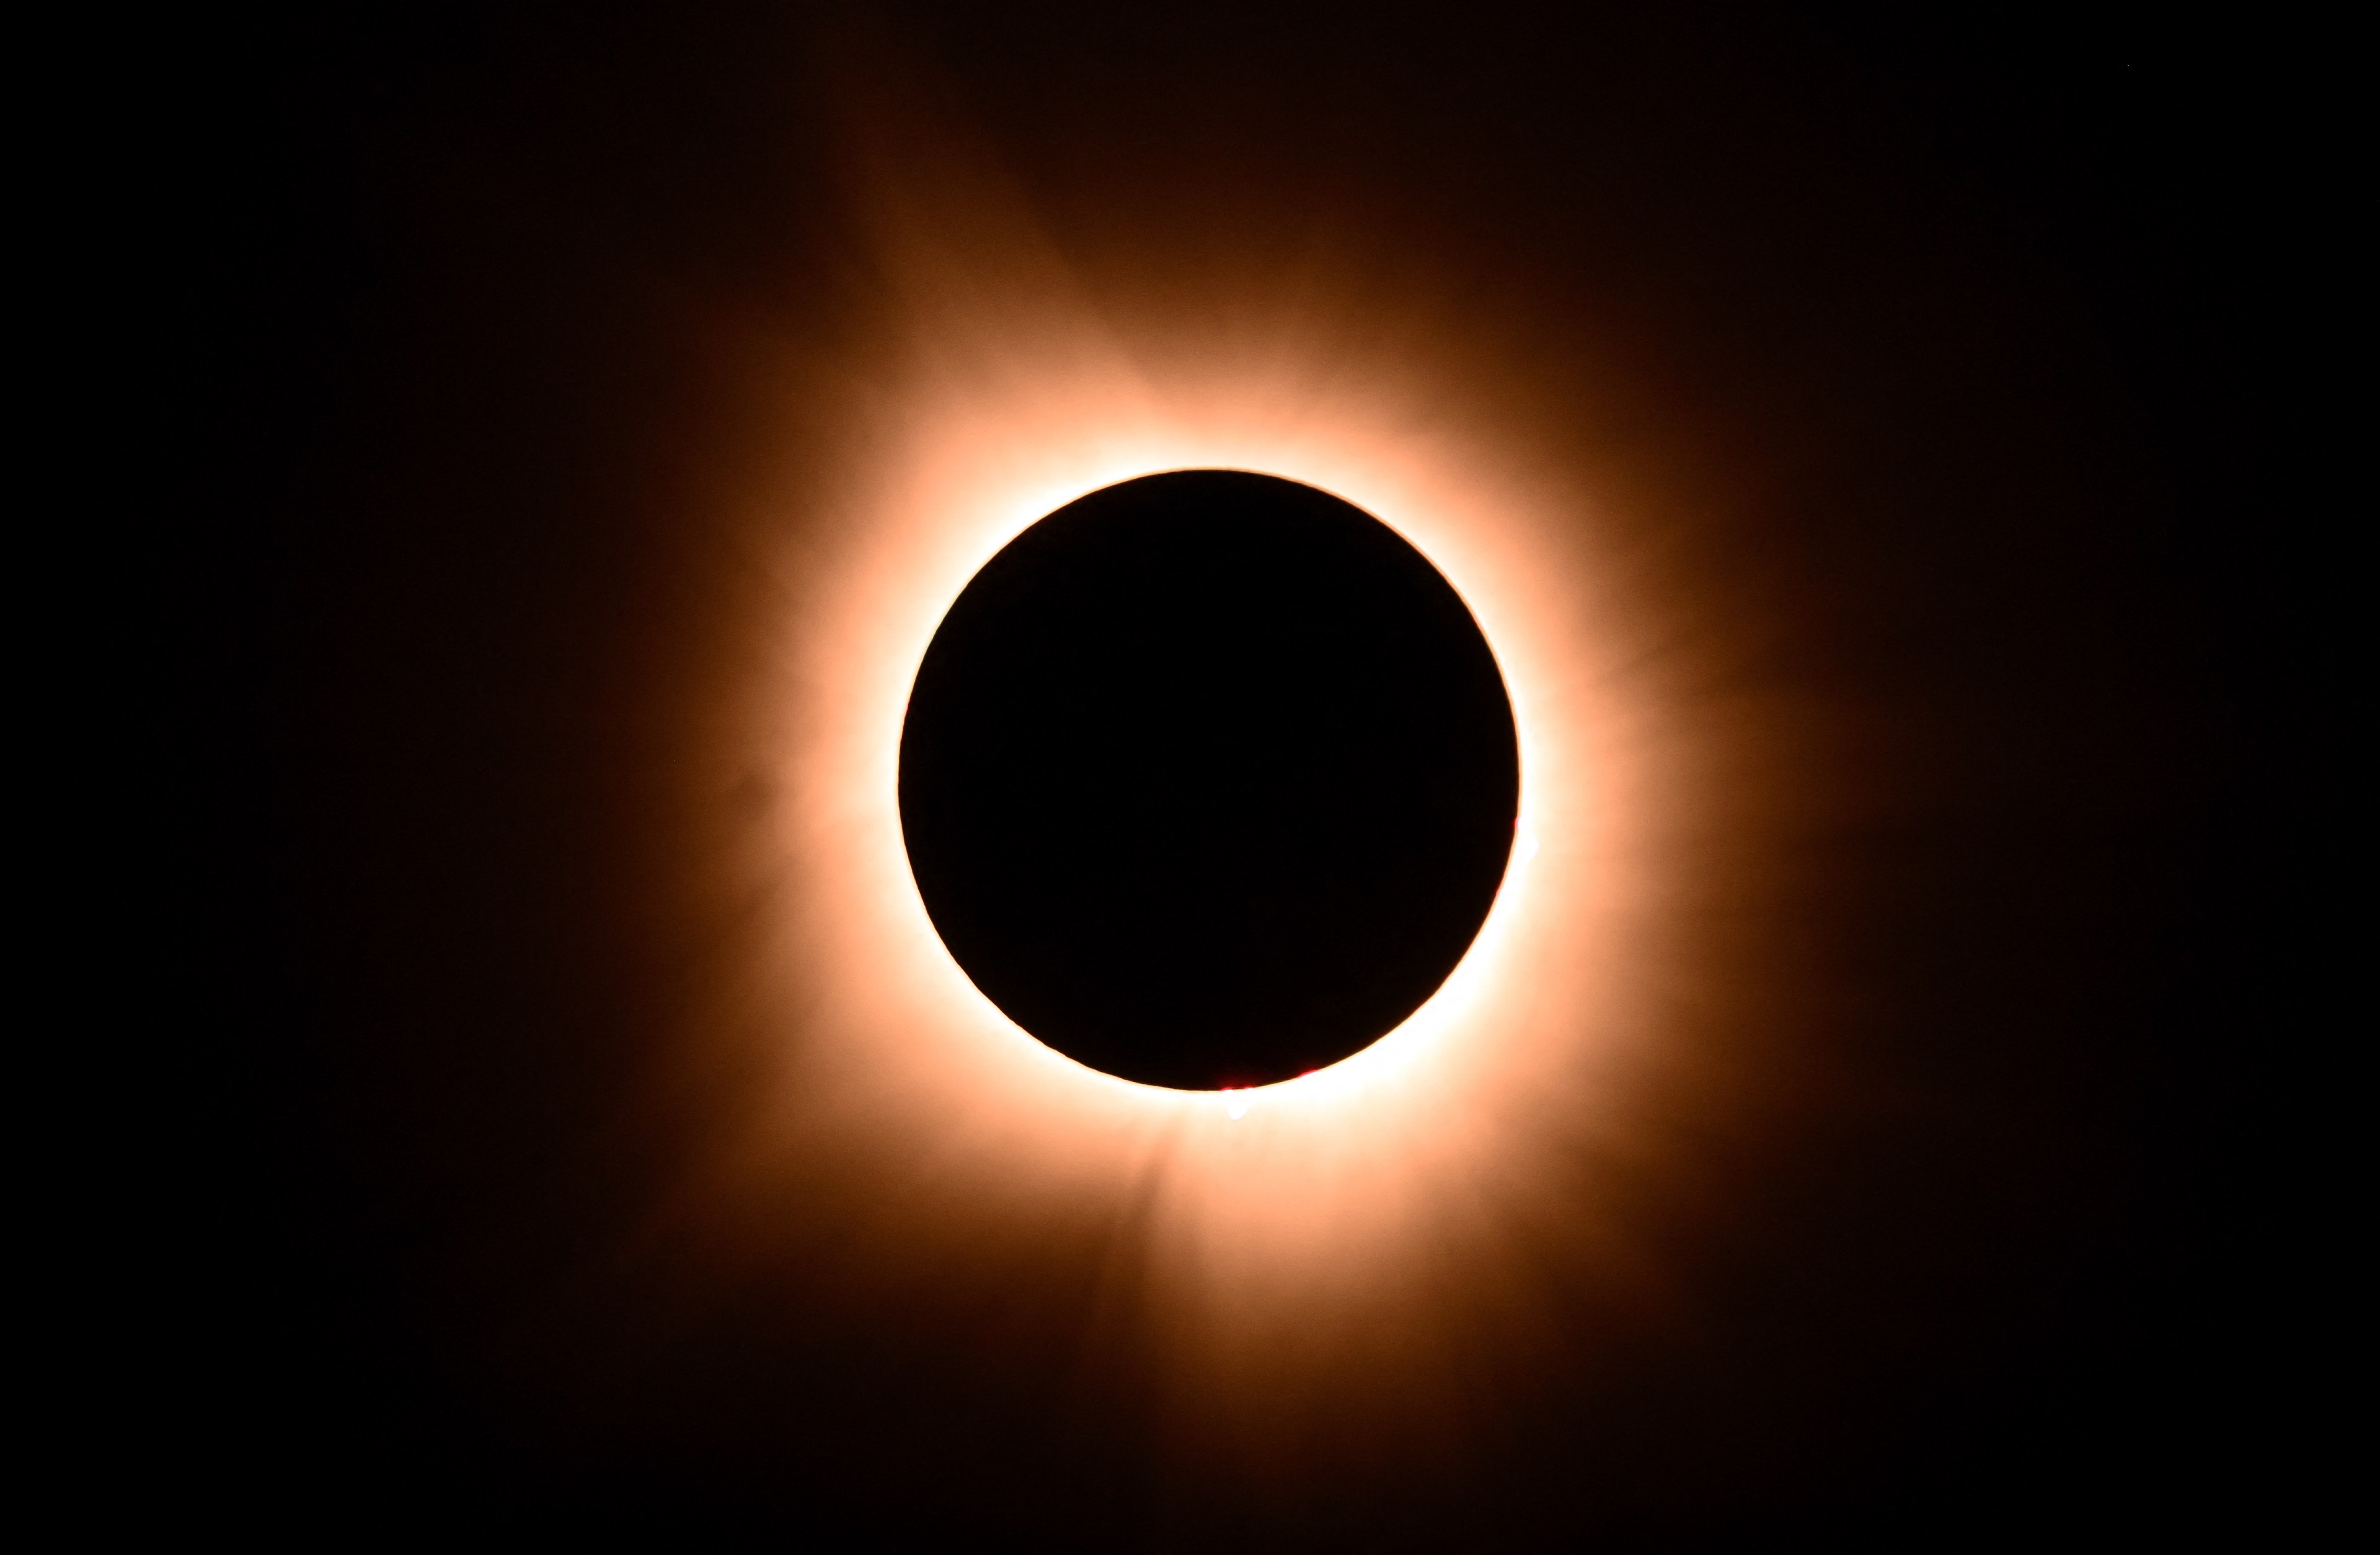 A solar eclipse with a bright corona surrounding the dark moon silhouette against a black sky.